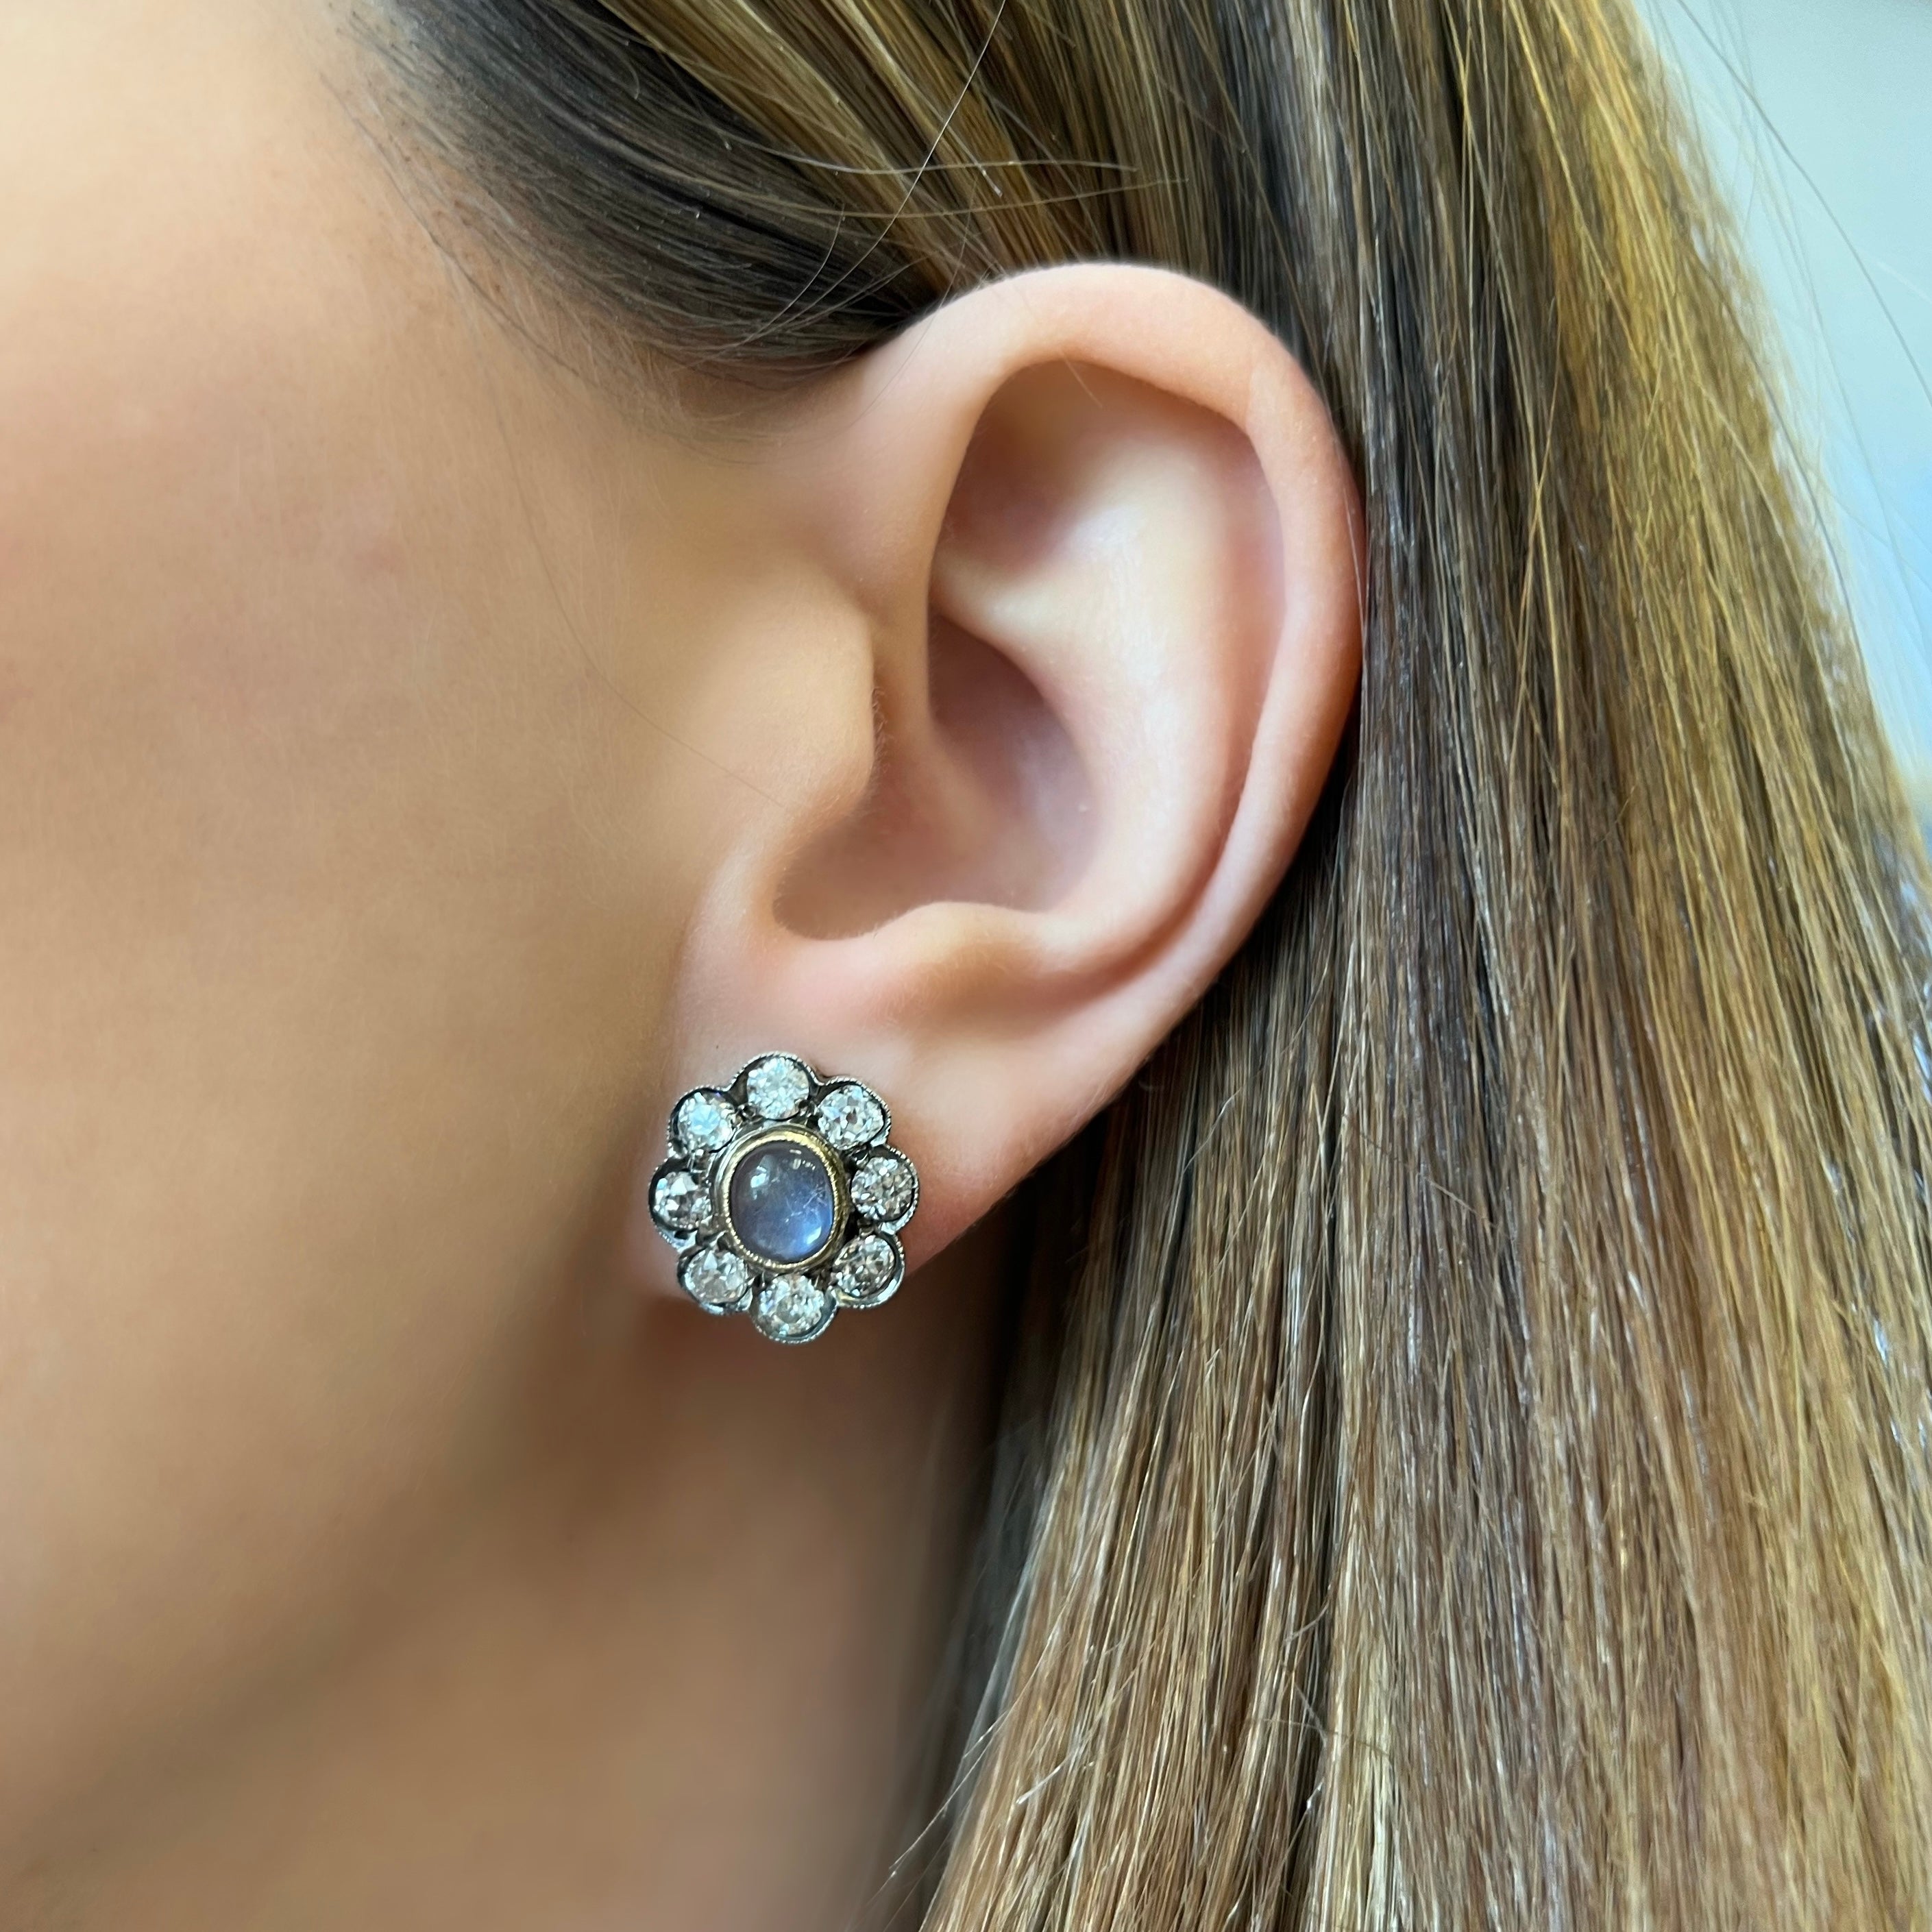 Antique earrings featuring lively bezel-set moonstones, with old mine-cut diamonds in a halo surround, set in silver topped gold. Being worn on the ear.